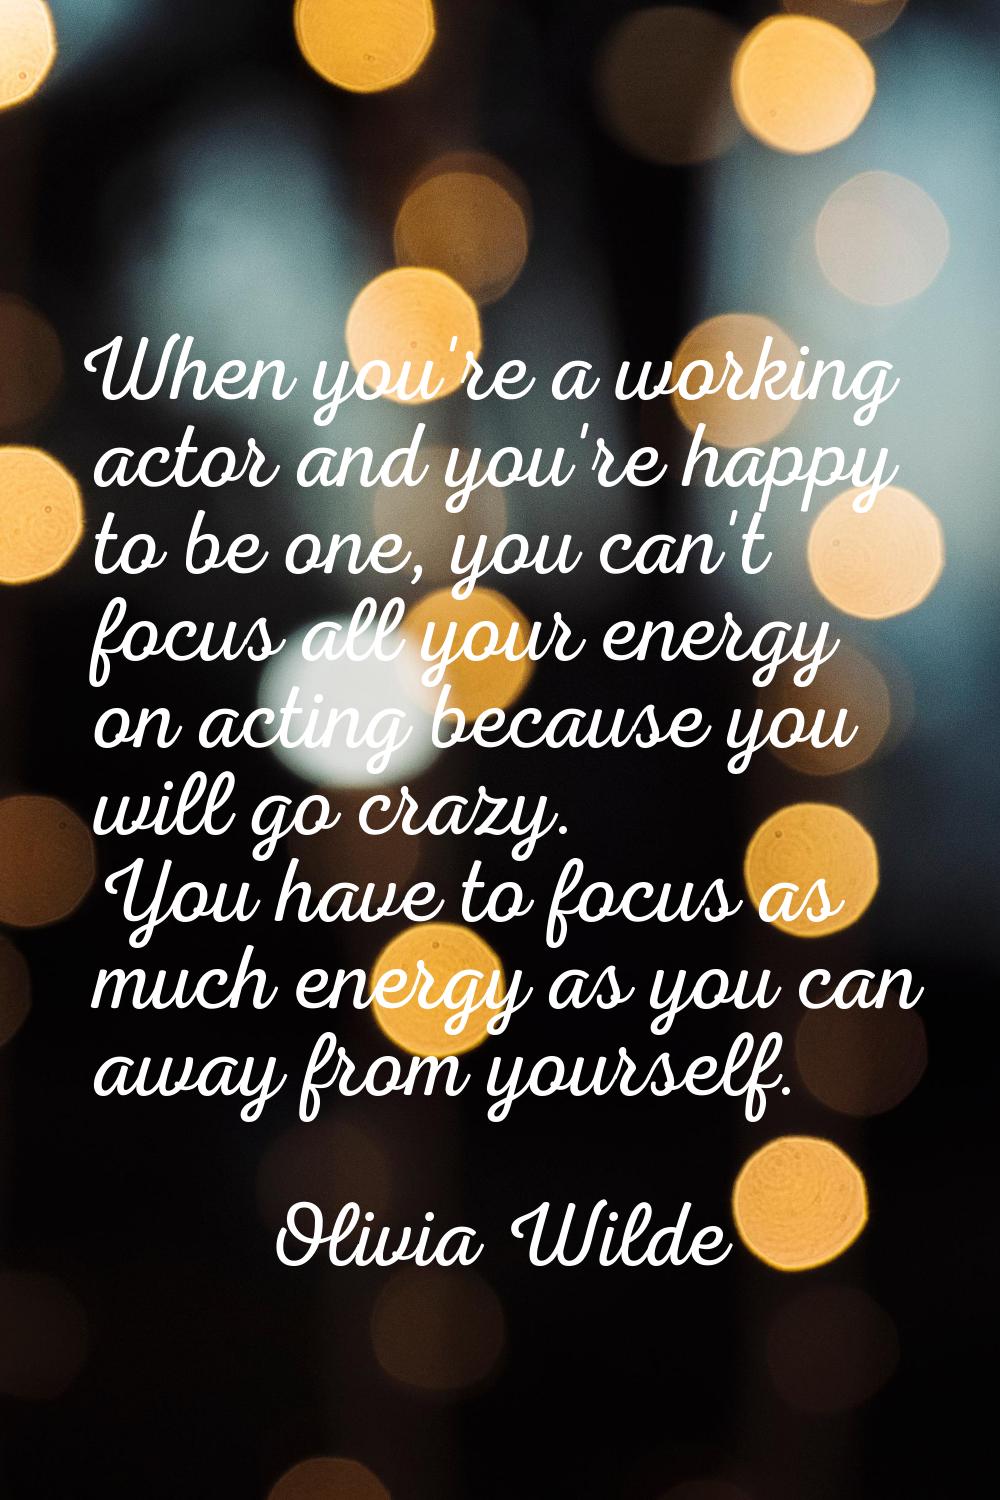 When you're a working actor and you're happy to be one, you can't focus all your energy on acting b